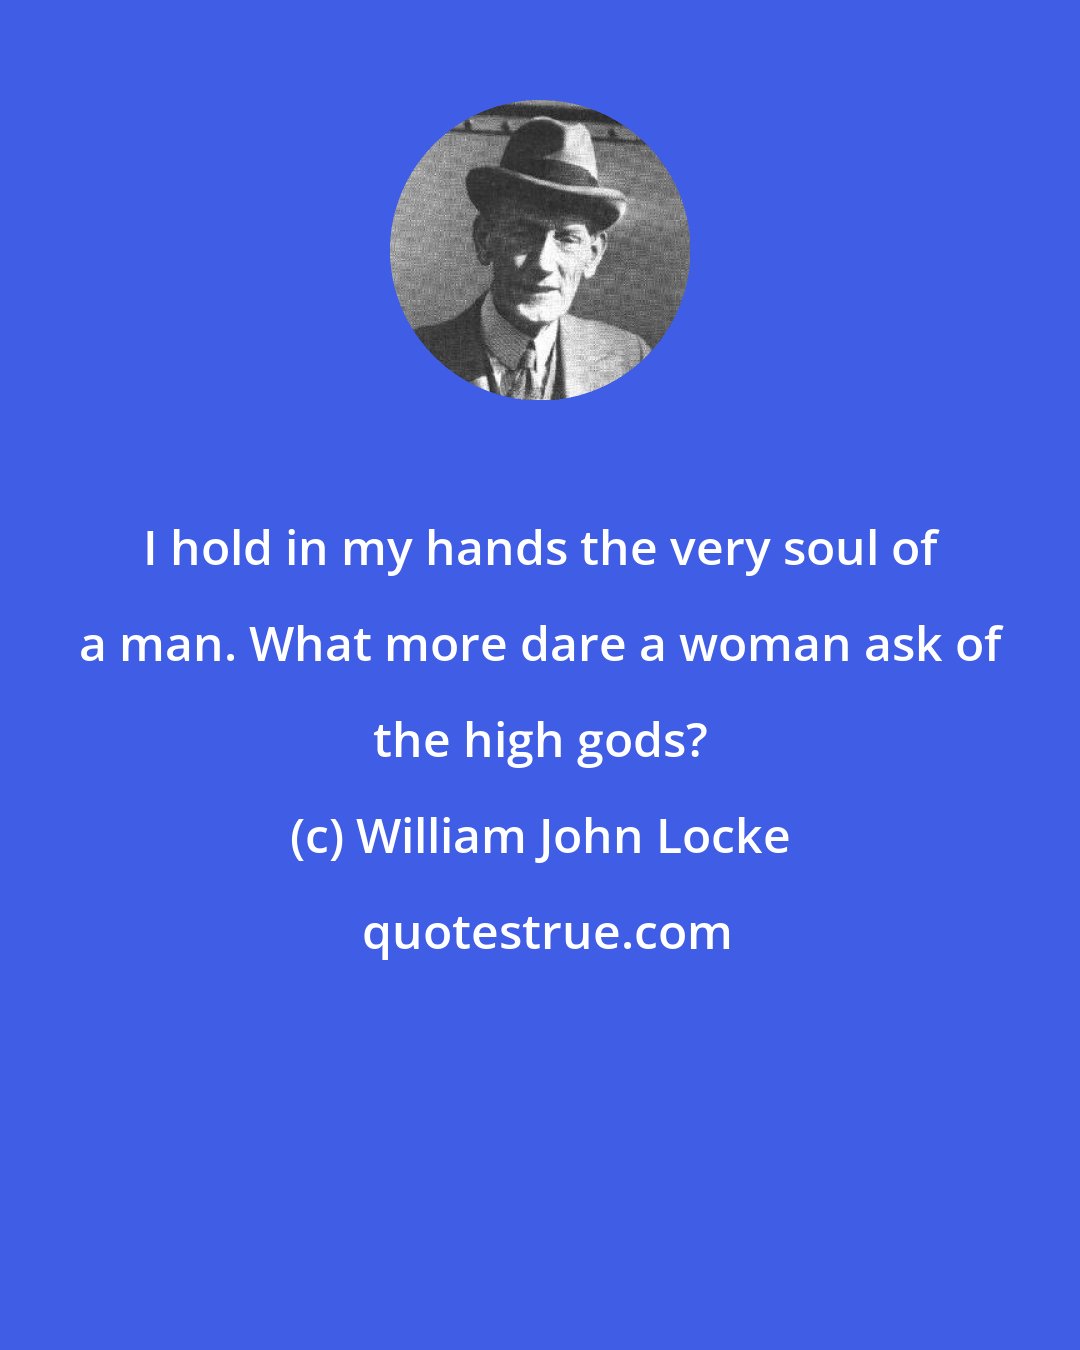 William John Locke: I hold in my hands the very soul of a man. What more dare a woman ask of the high gods?